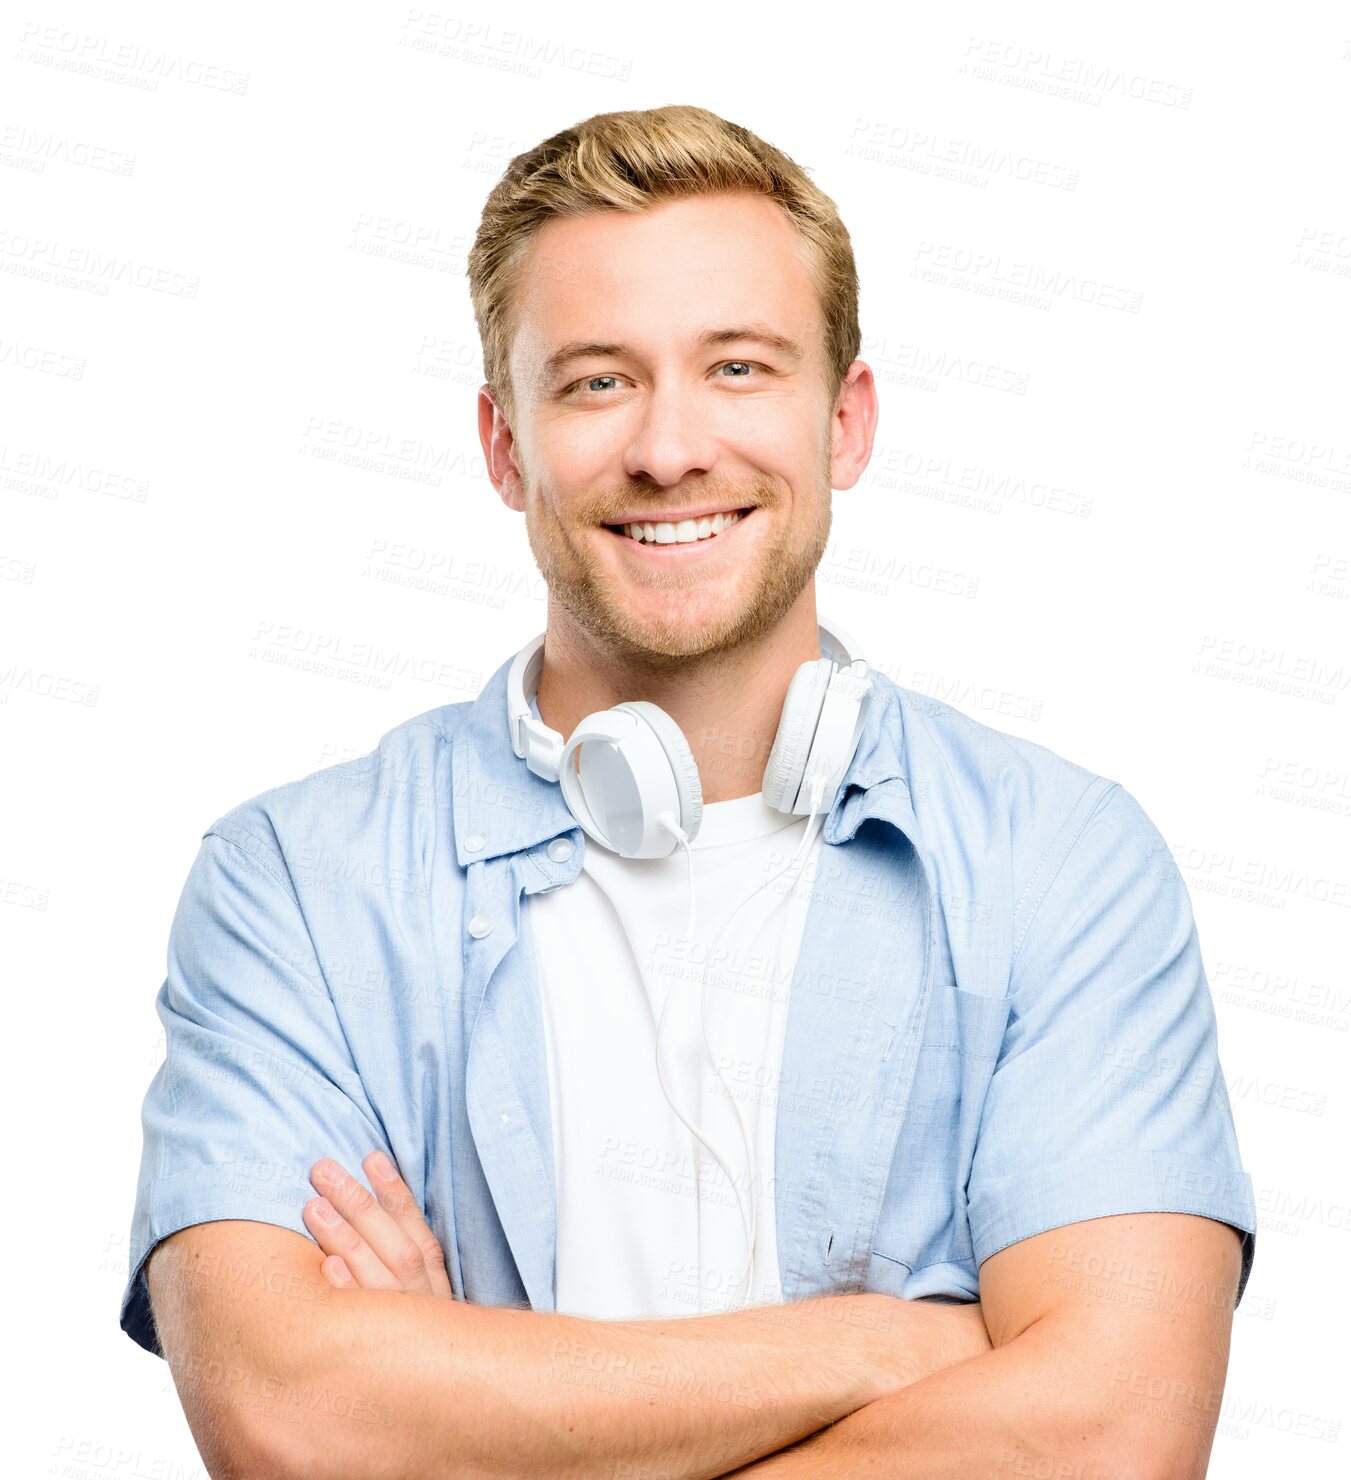 Buy stock photo Happy man, portrait smile and arms crossed standing isolated on a transparent PNG background. Confident male person smiling with headphones and casual fashion or clothing in confidence and happiness